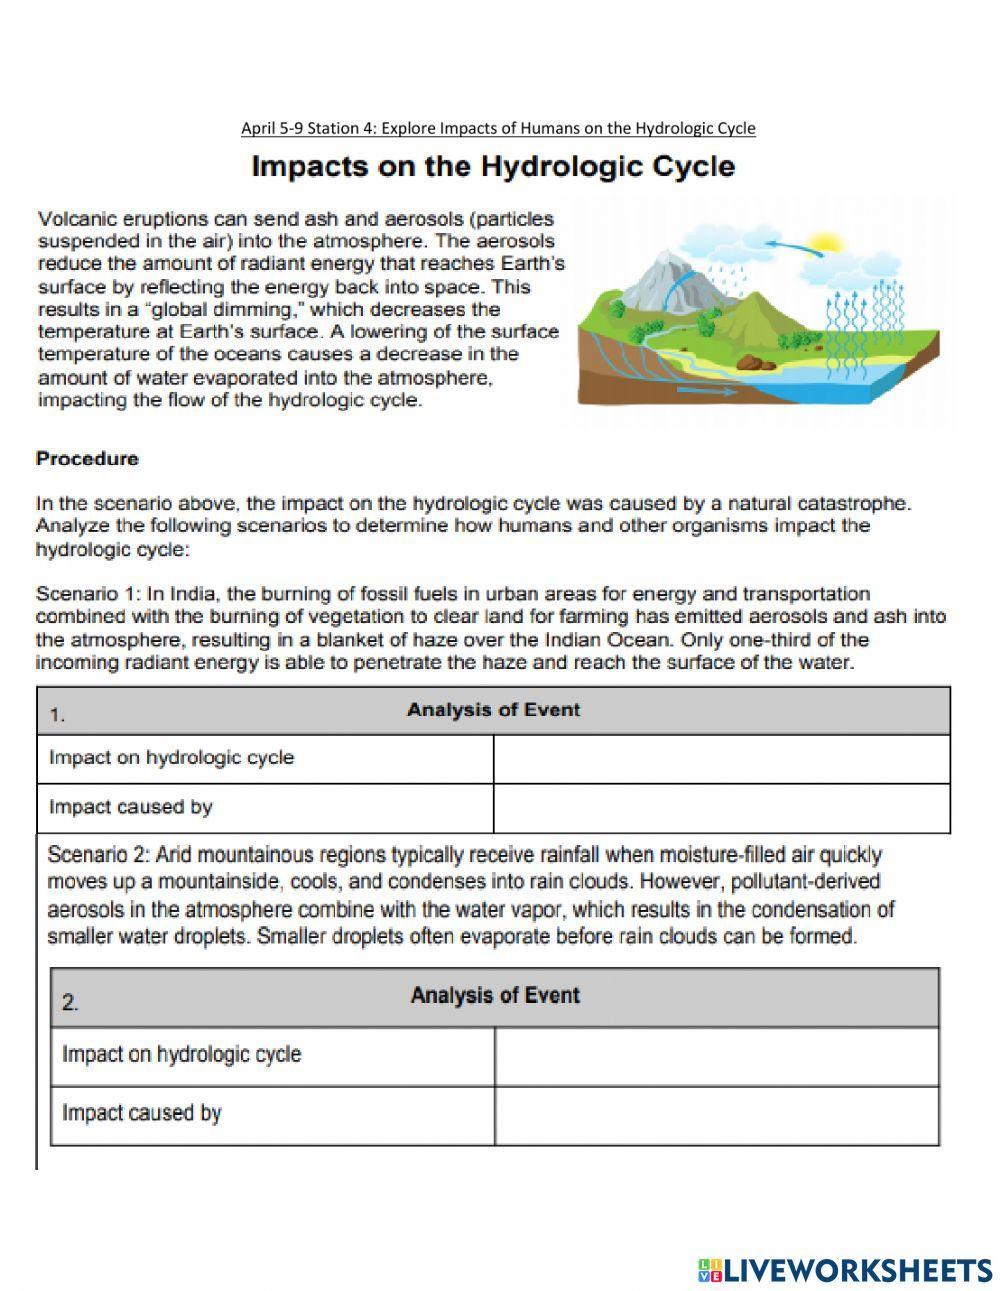 April 5-9 Station 4: Impacts on Water Cycle